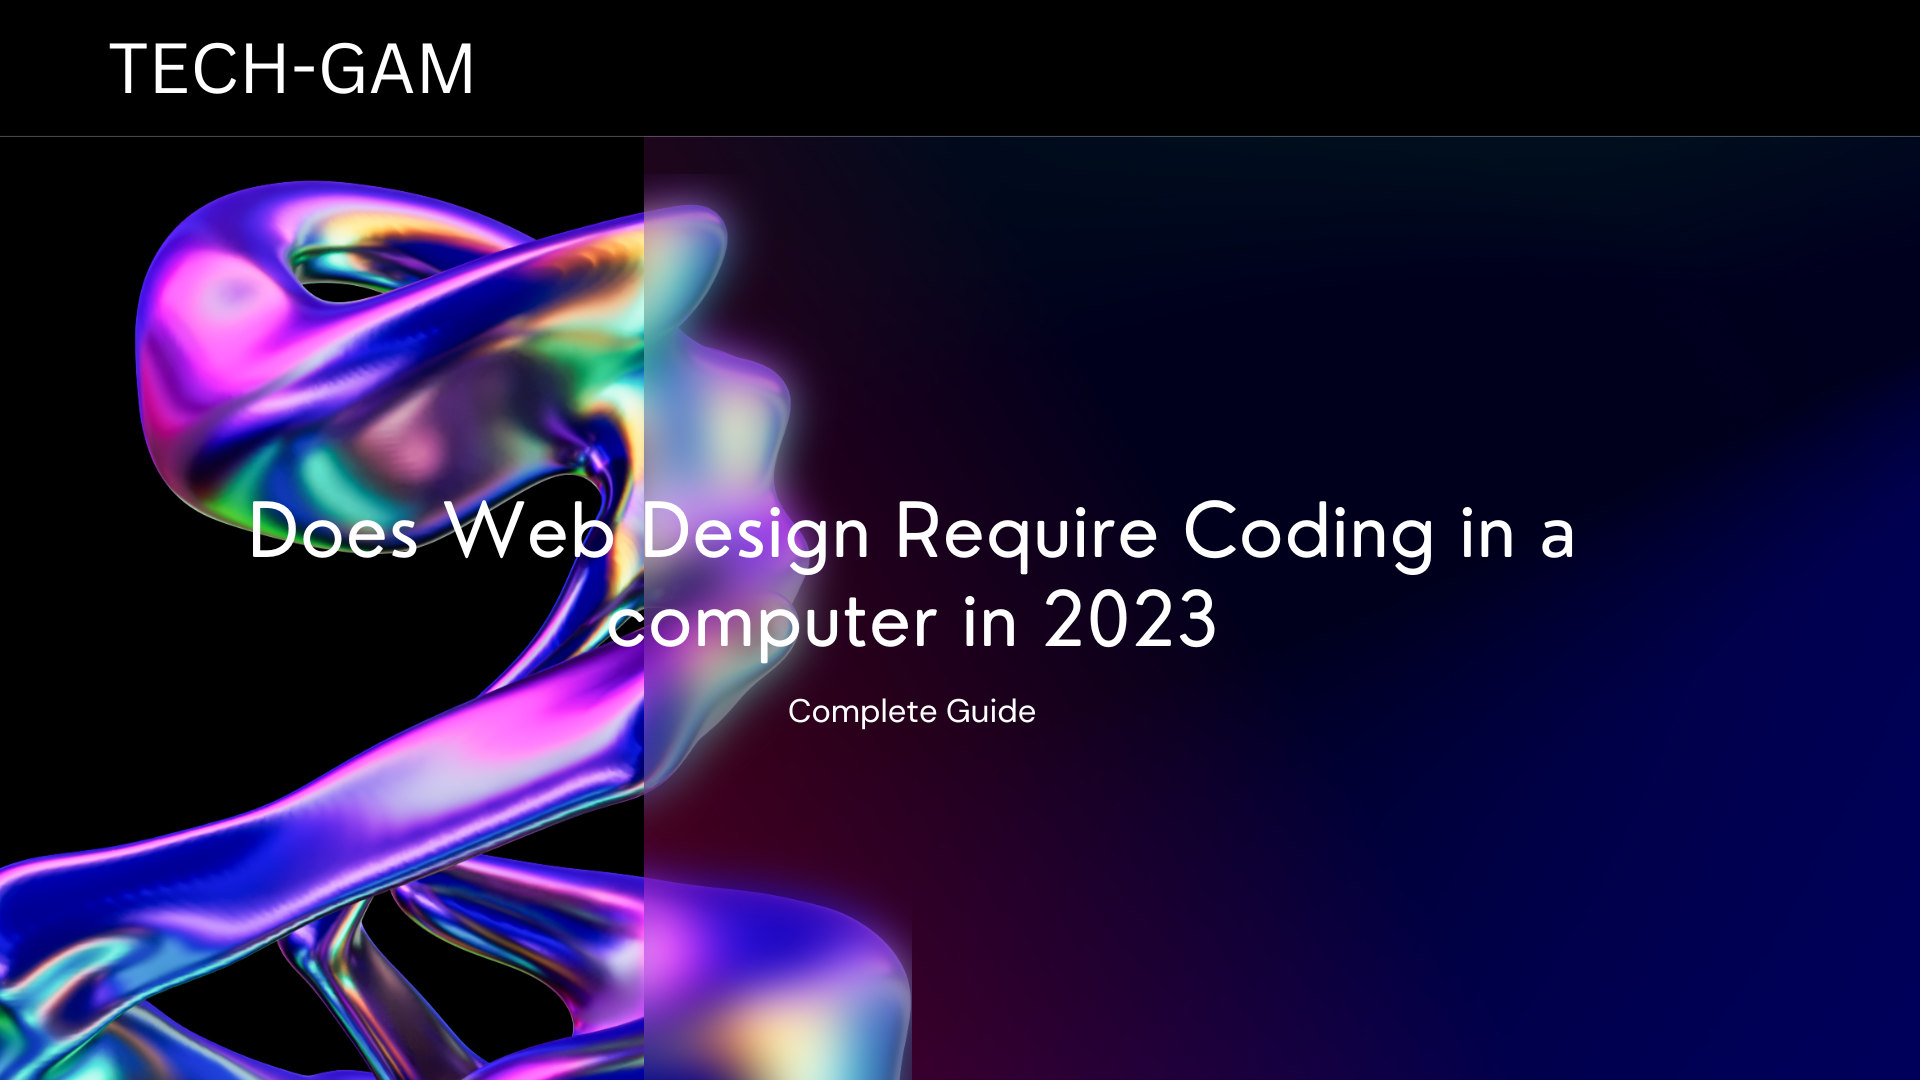 Does Web Design Require Coding in a computer in 2023-(complete guide)